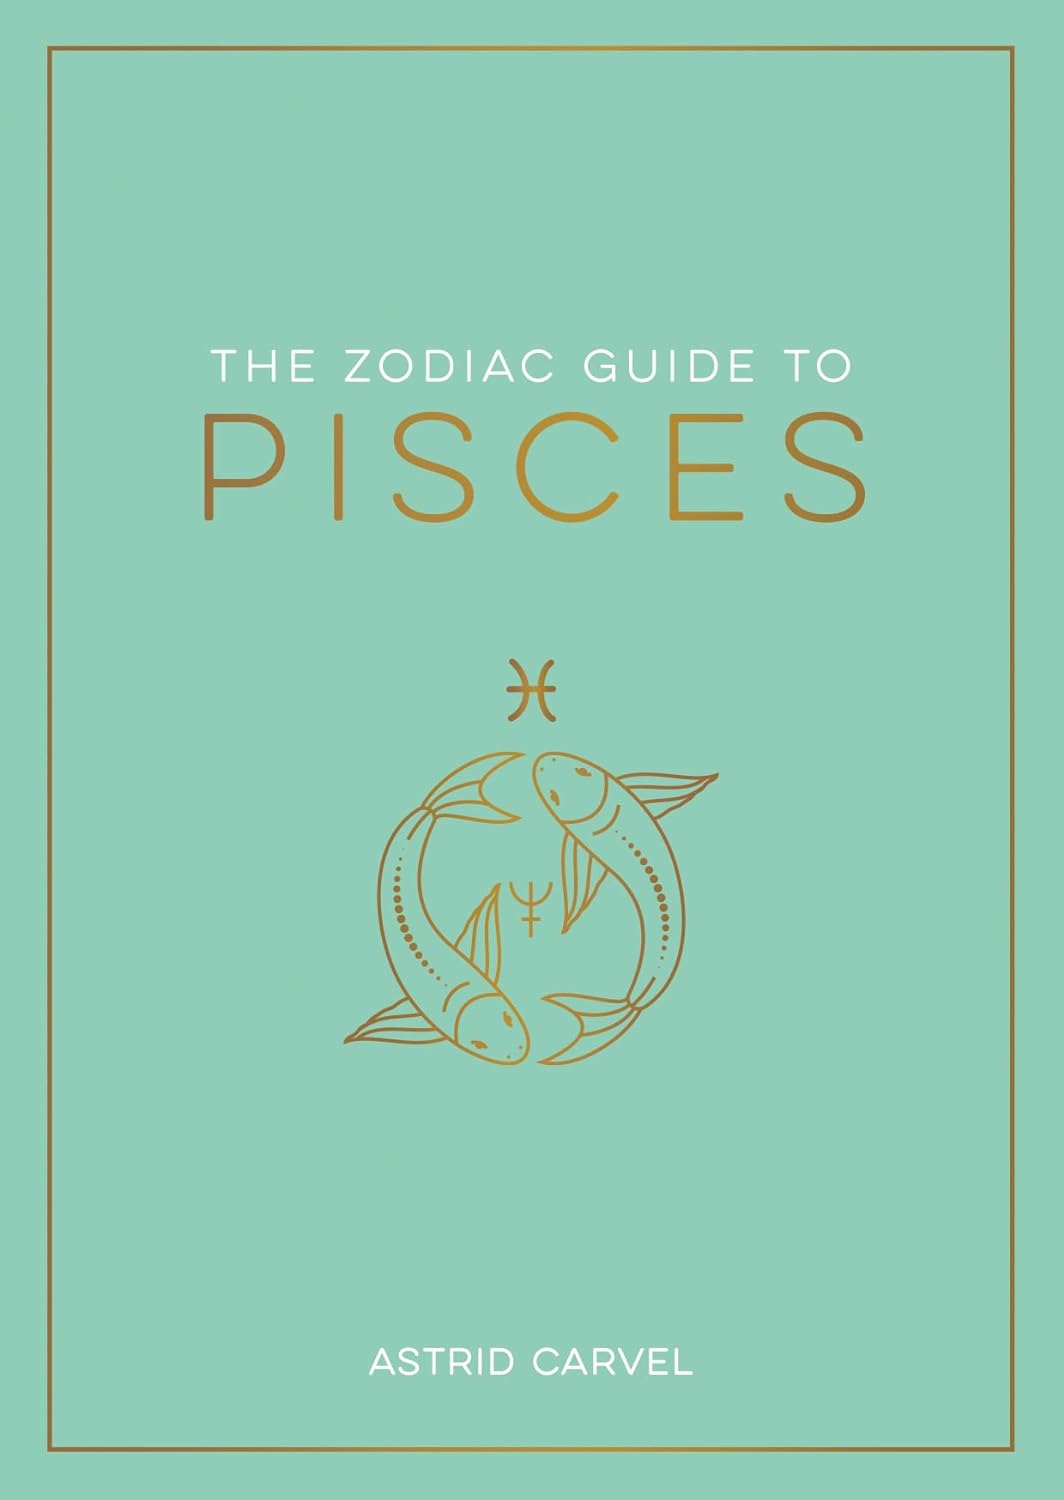 The Zodiac Guide To ~ Each Sign